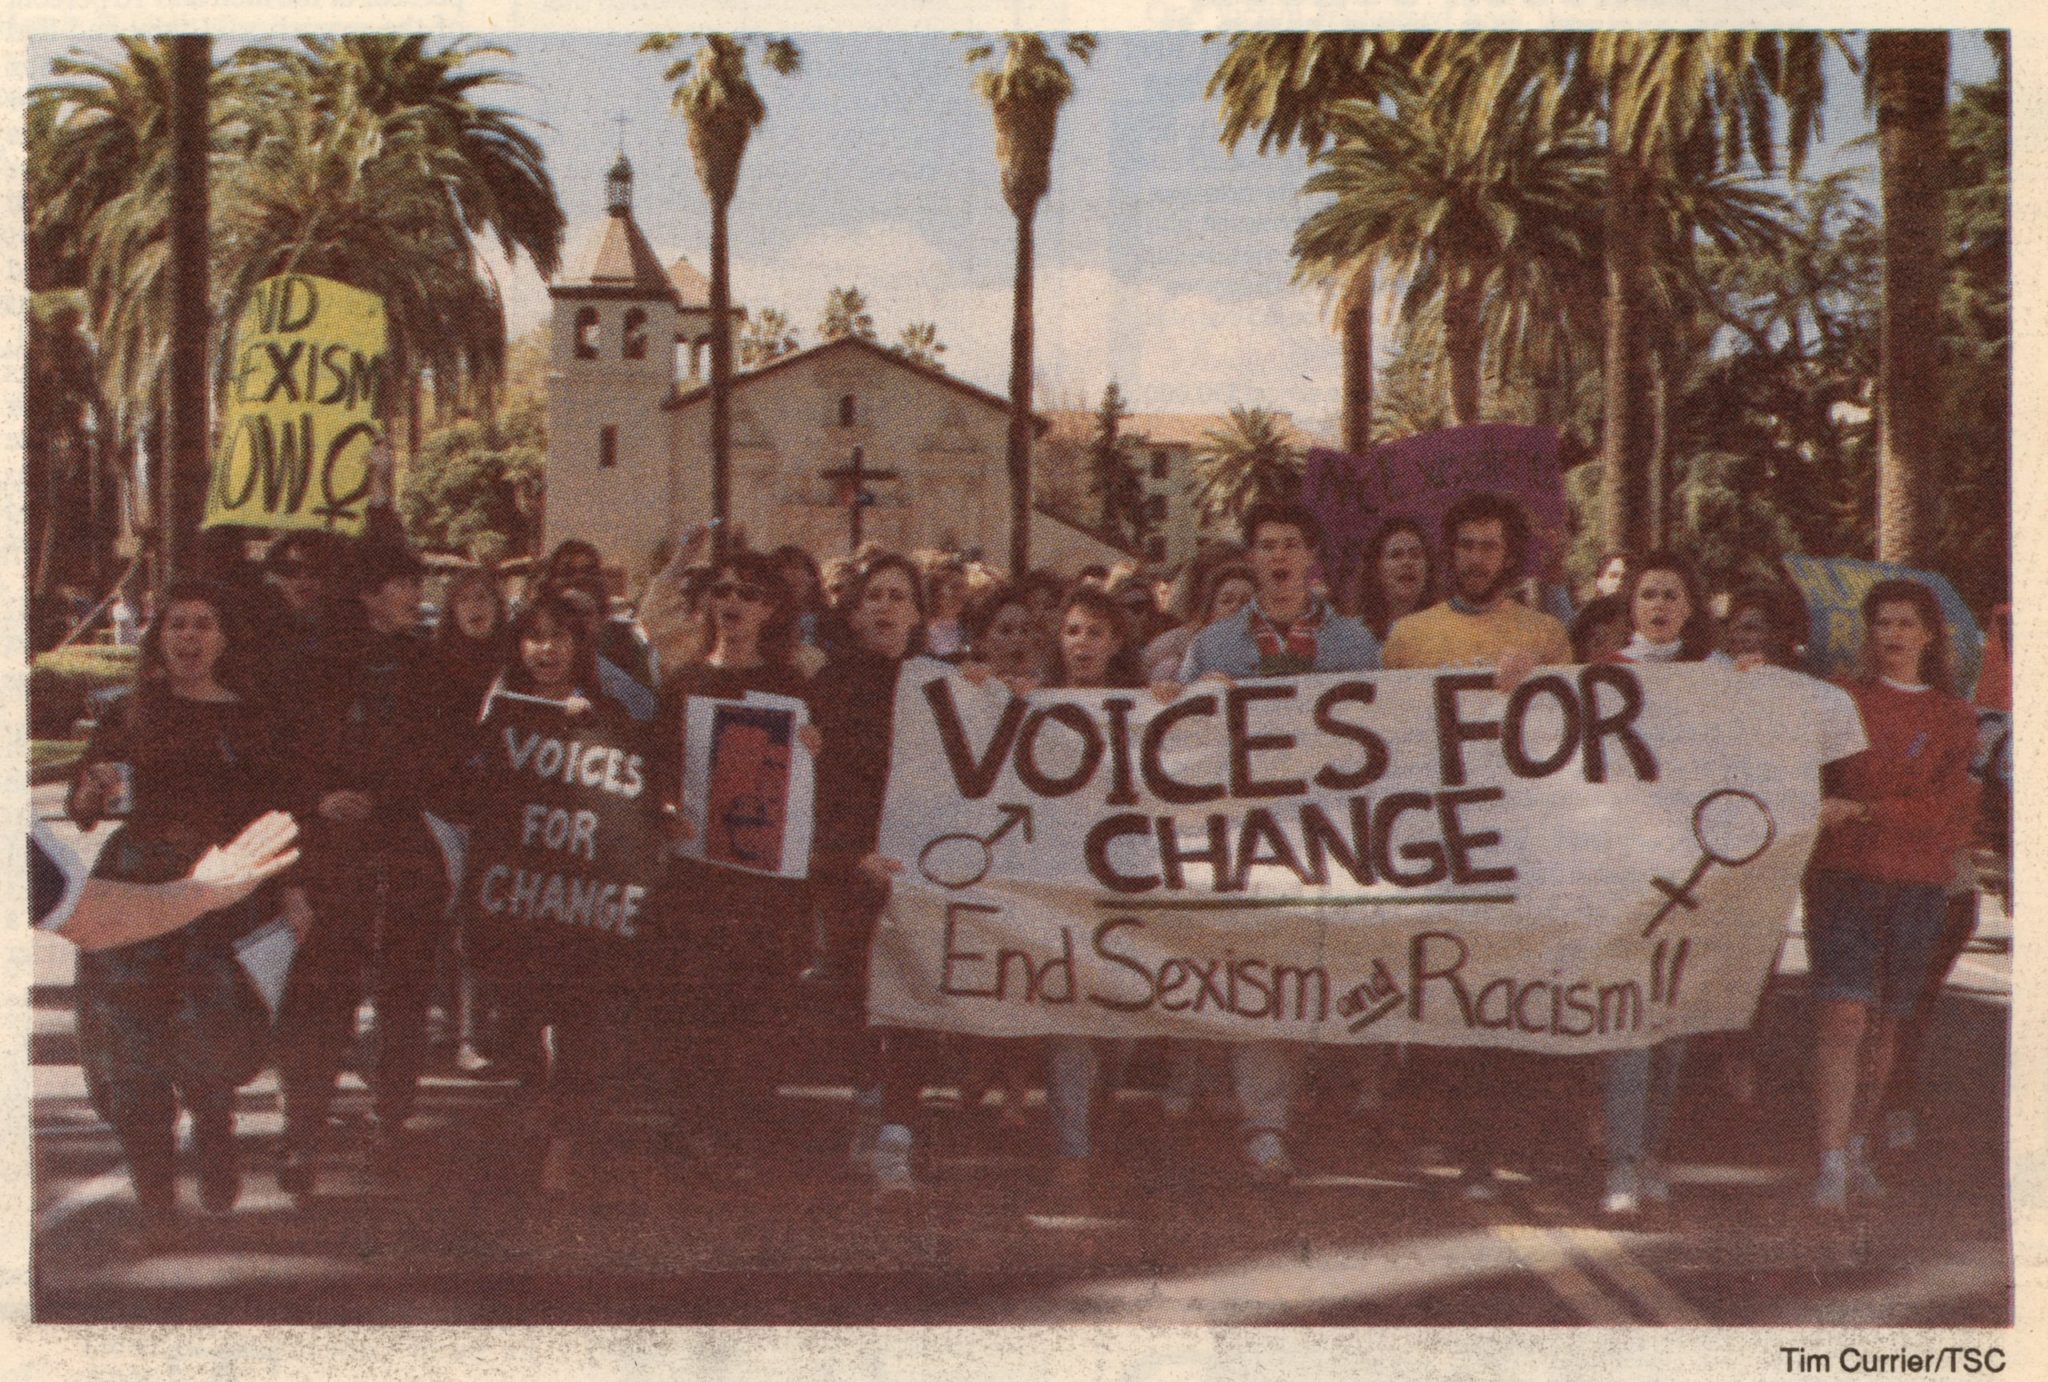 Voices for change